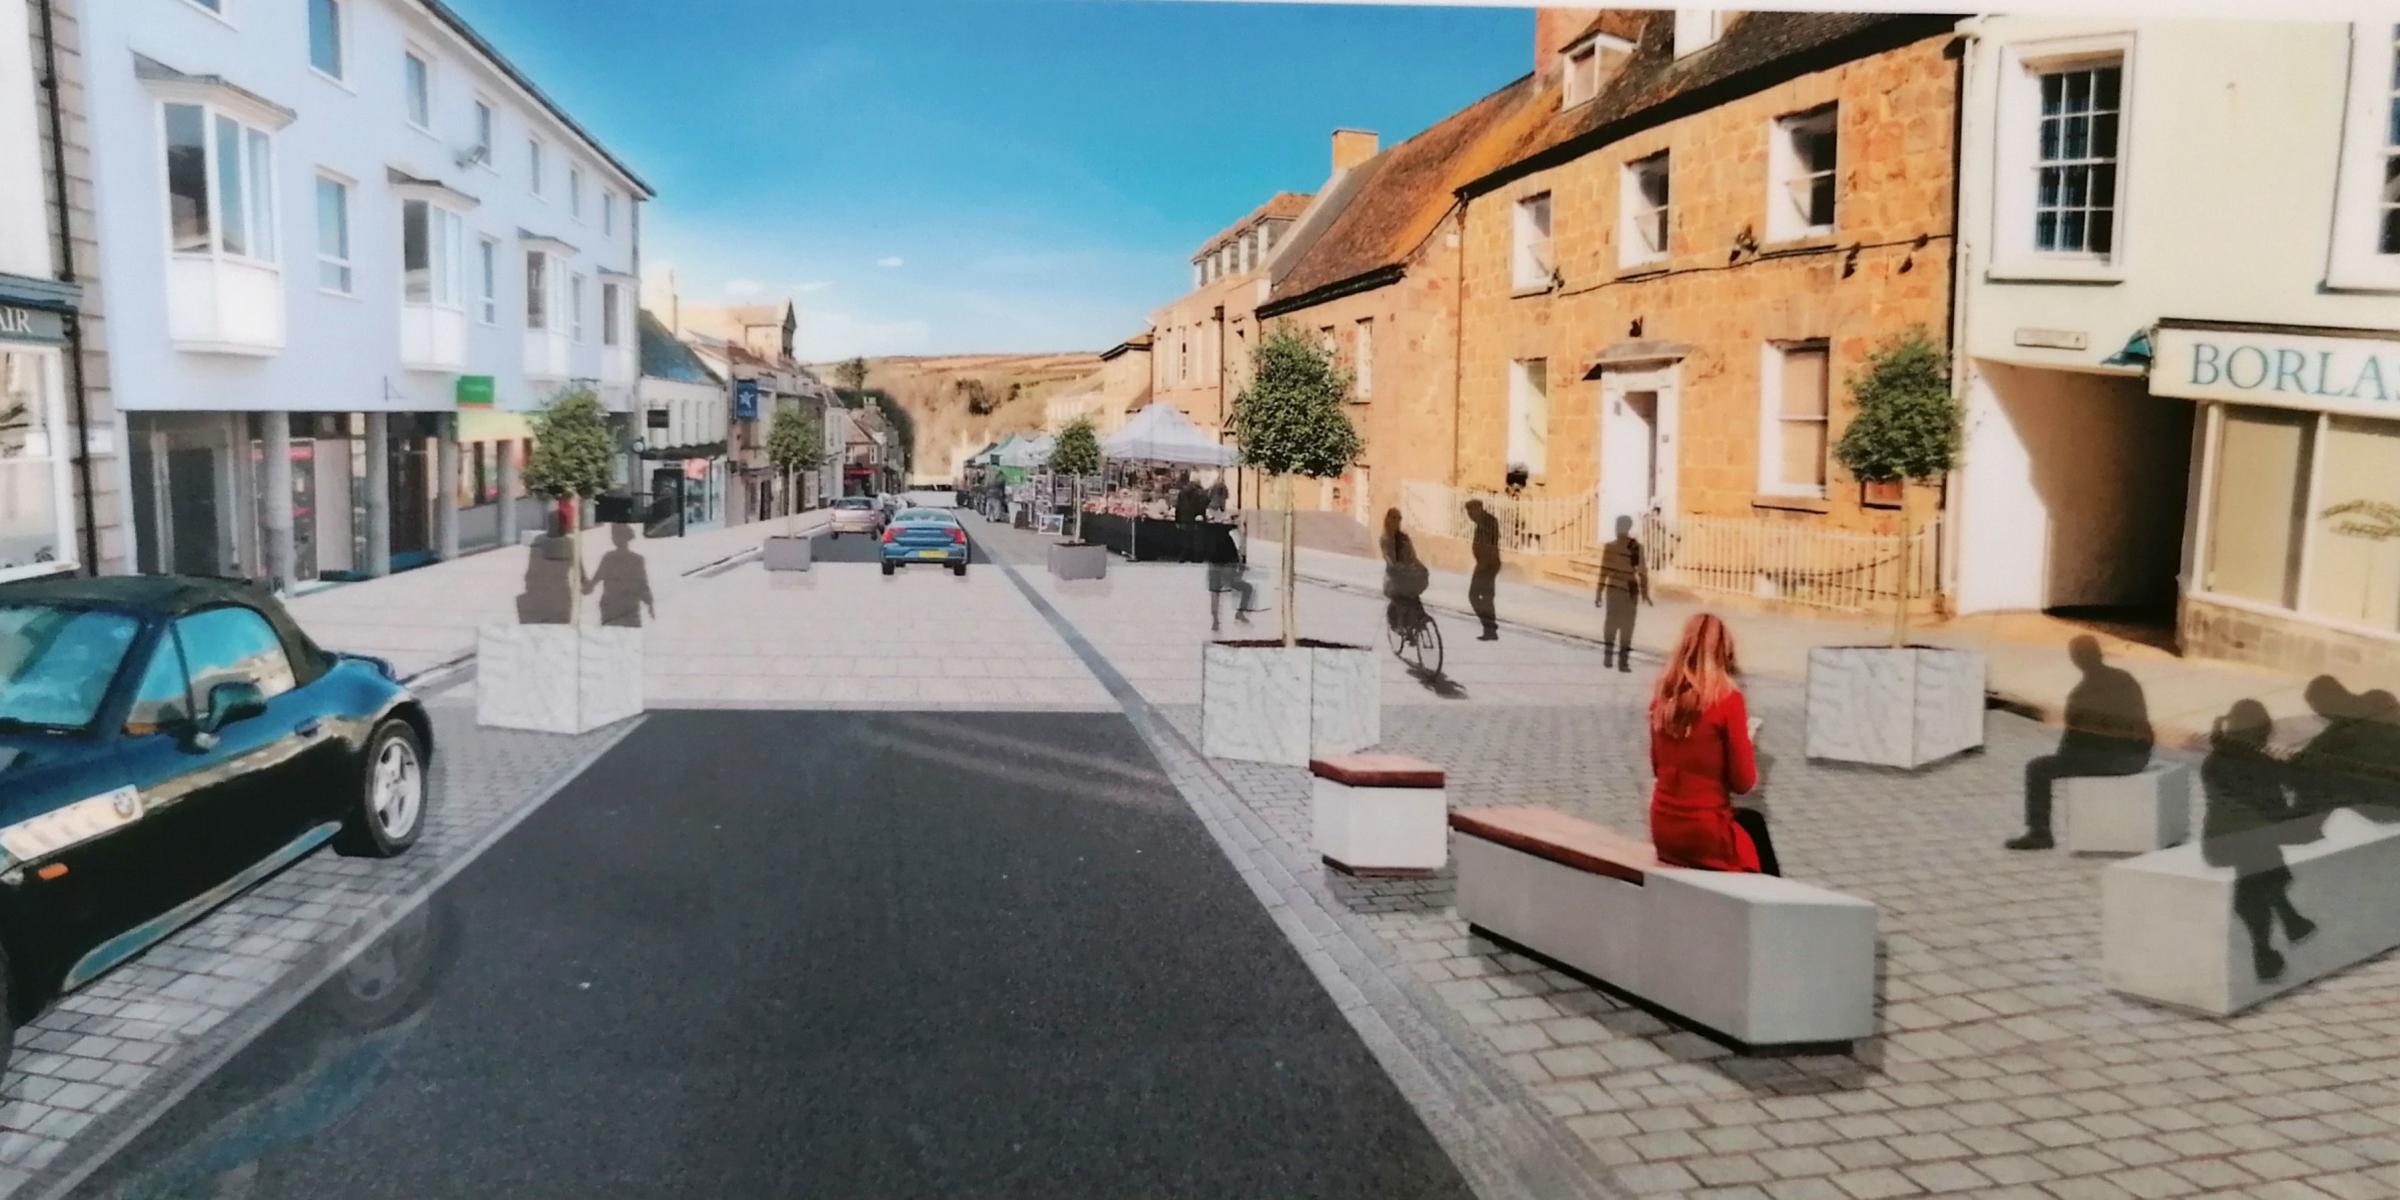 A CGI looking down a one-way Coinagehall Street with parking on the left and widened pavement for market stalls and seating on the right Picture: MeiLoci